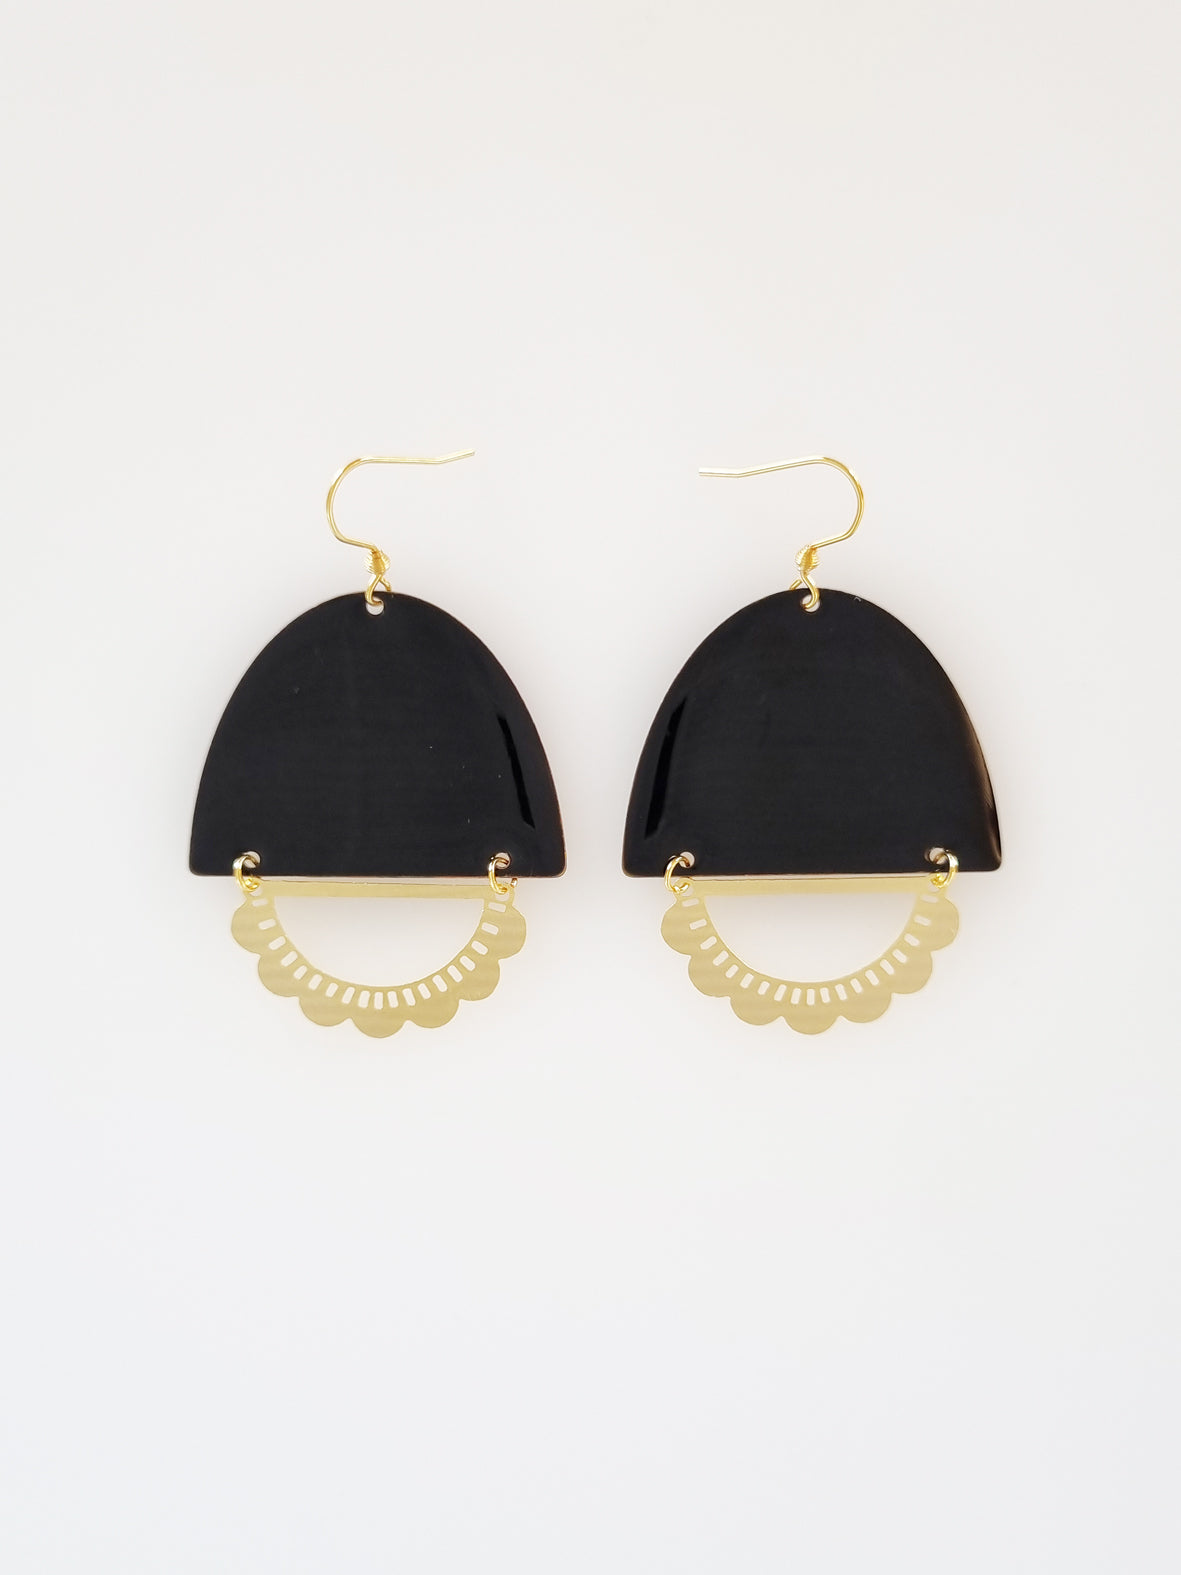 A pair of statement earrings with a hook sit against a white background. They feature a black enamel arch and a horizontal plated brass D shape with scalloped detail.